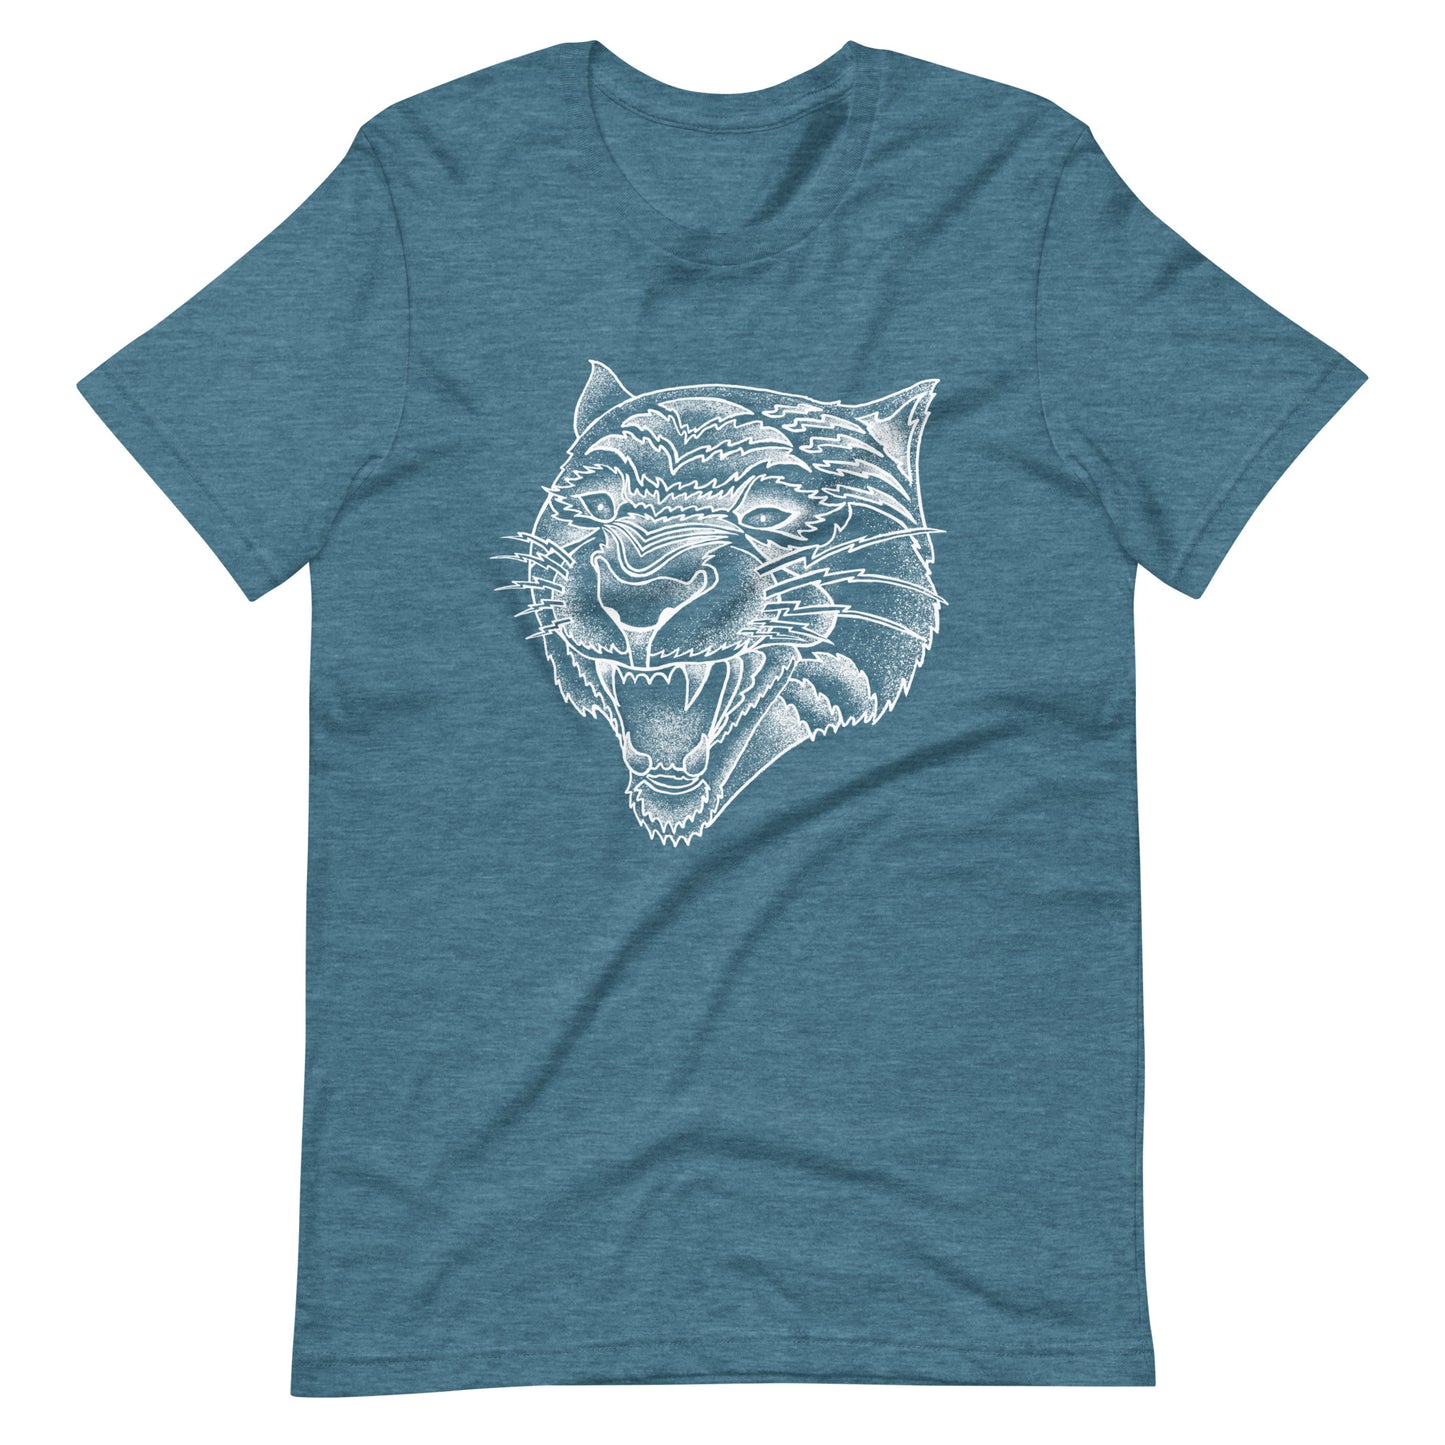 Panther White - Men's t-shirt - Heather Deep Teal Front